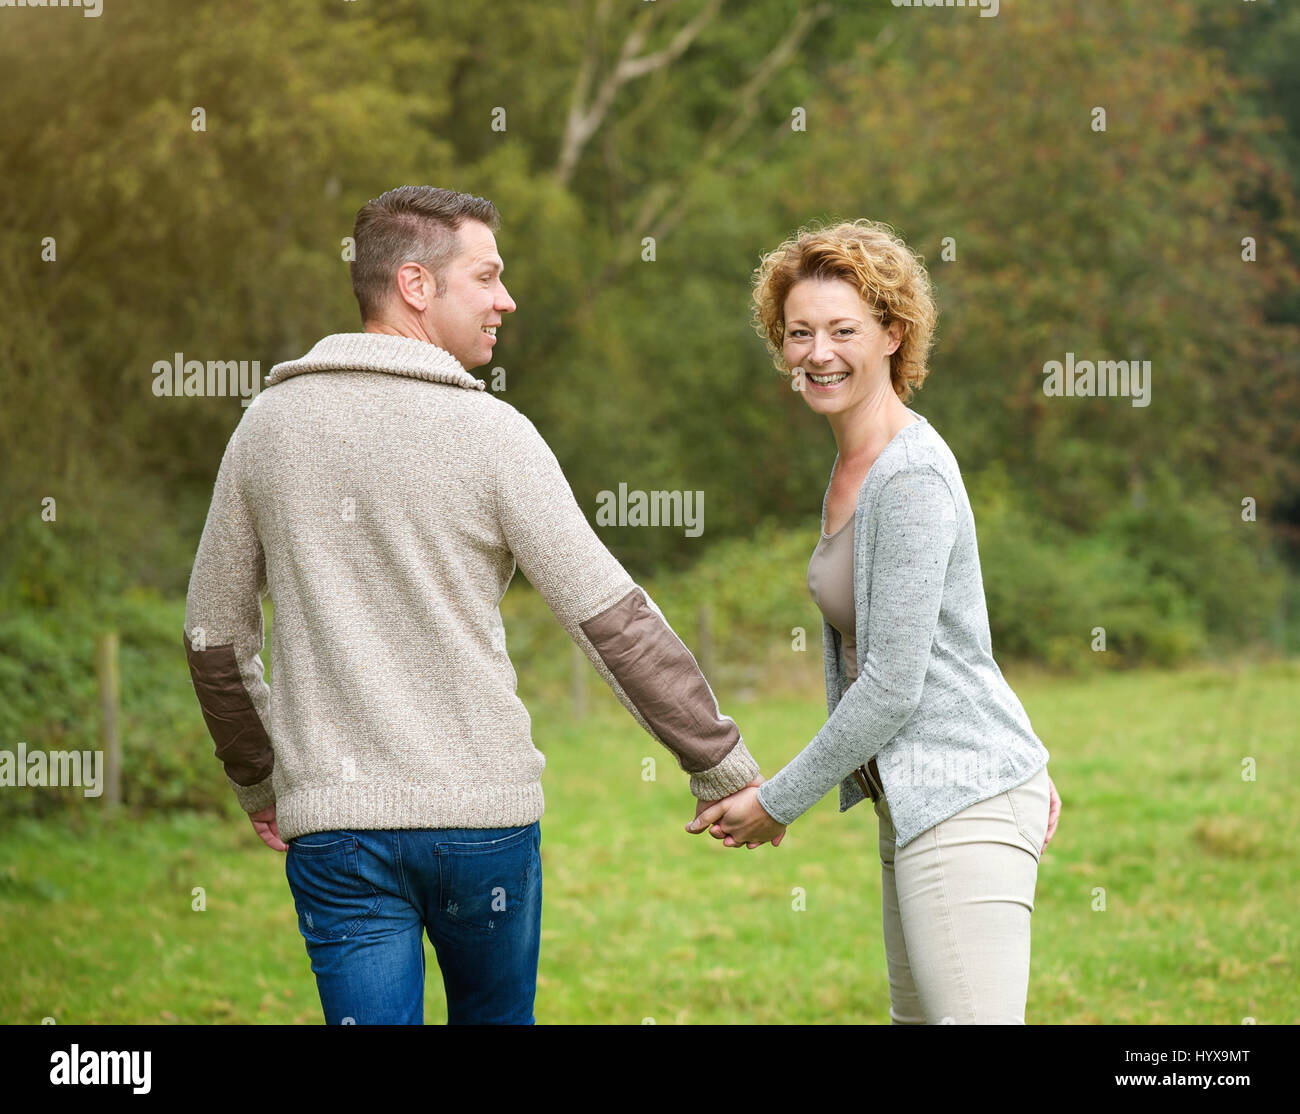 Portrait of a happy couple holding hands and walking outdoors Banque D'Images